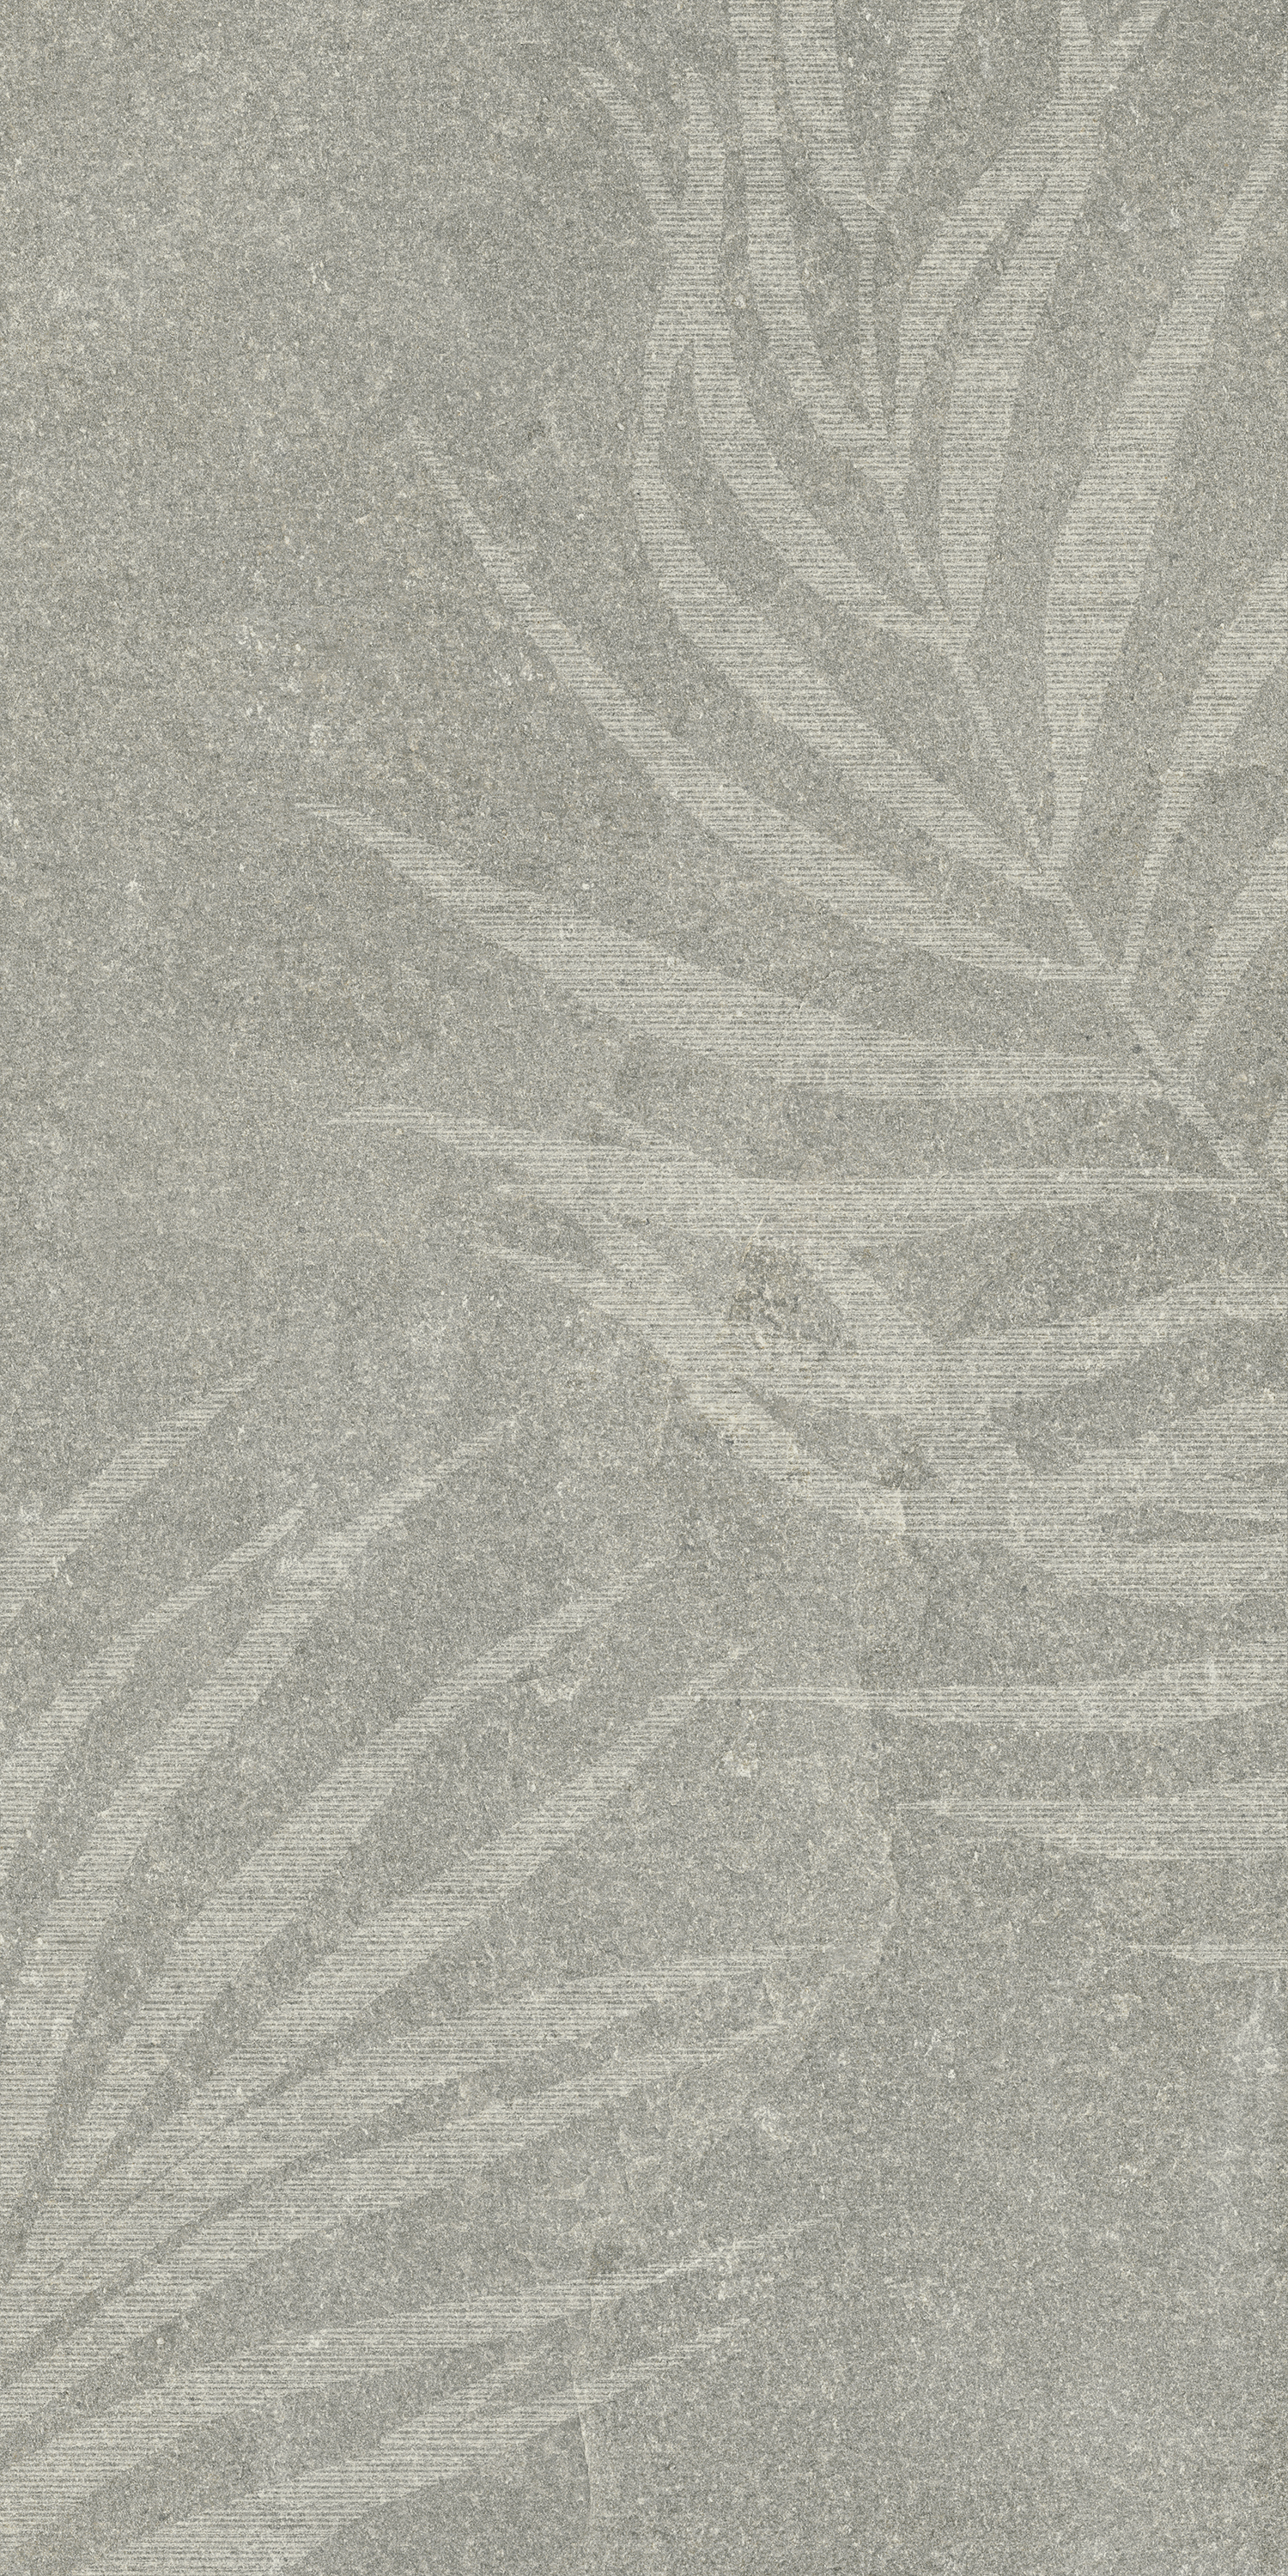 Marcacorona Strutturato Hithick Decor Leaf J037 60x120cm rectified 20mm